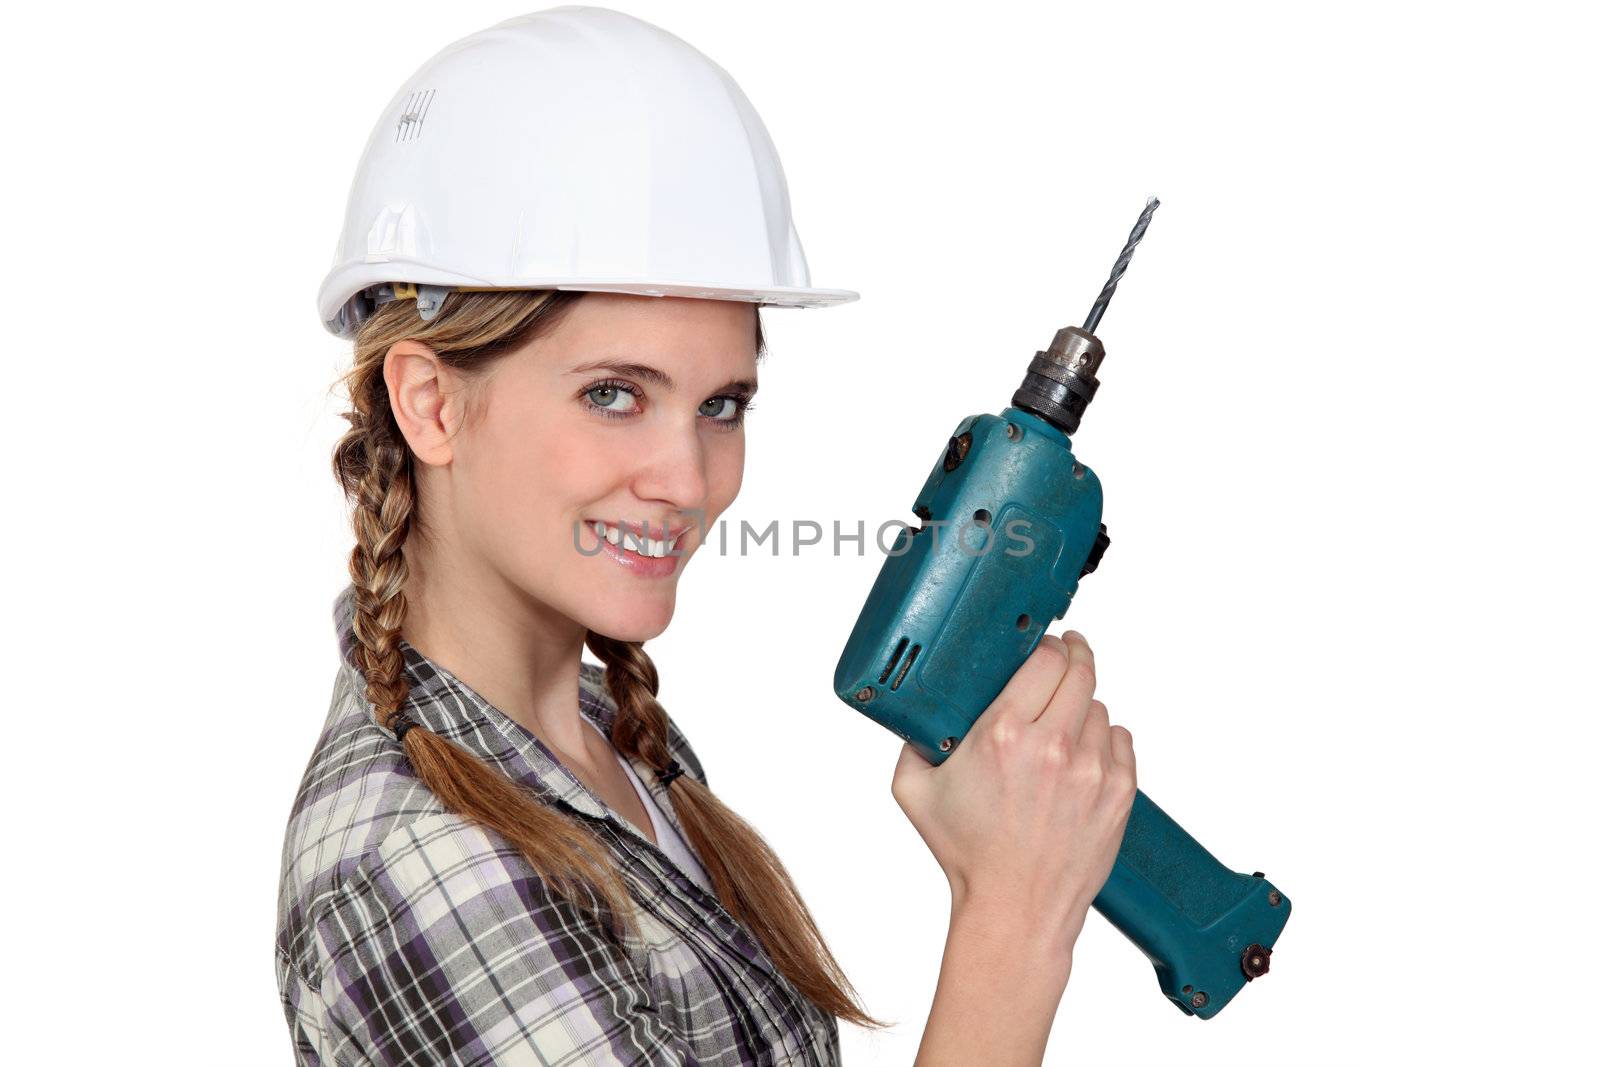 Smiling tradeswoman holding a power tool by phovoir